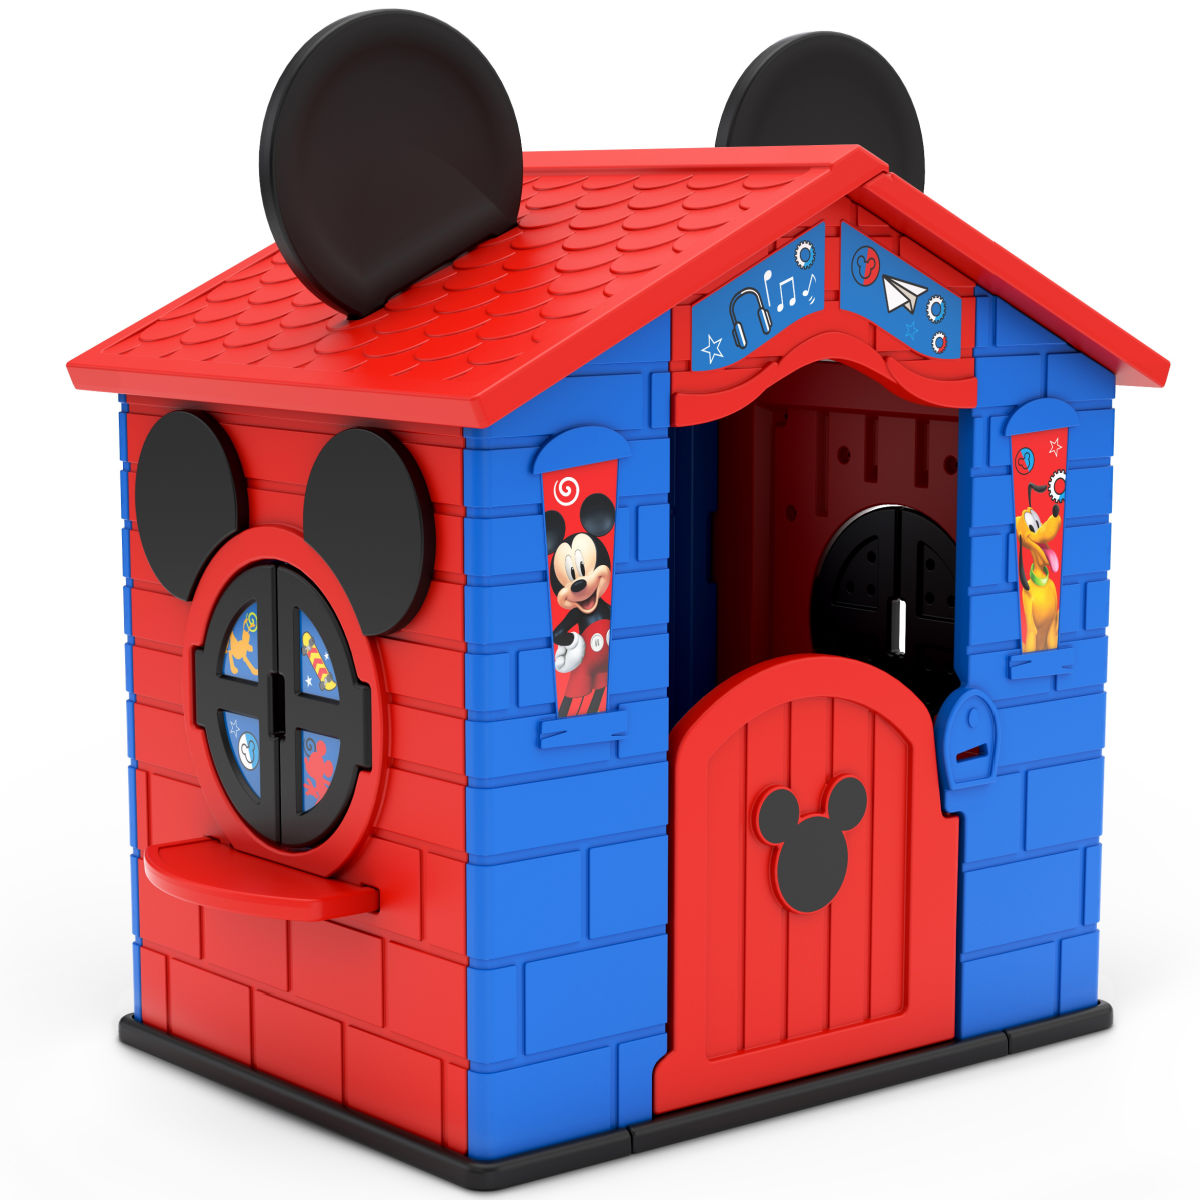 Disney Mickey Mouse Plastic Indoor Outdoor Playhouse